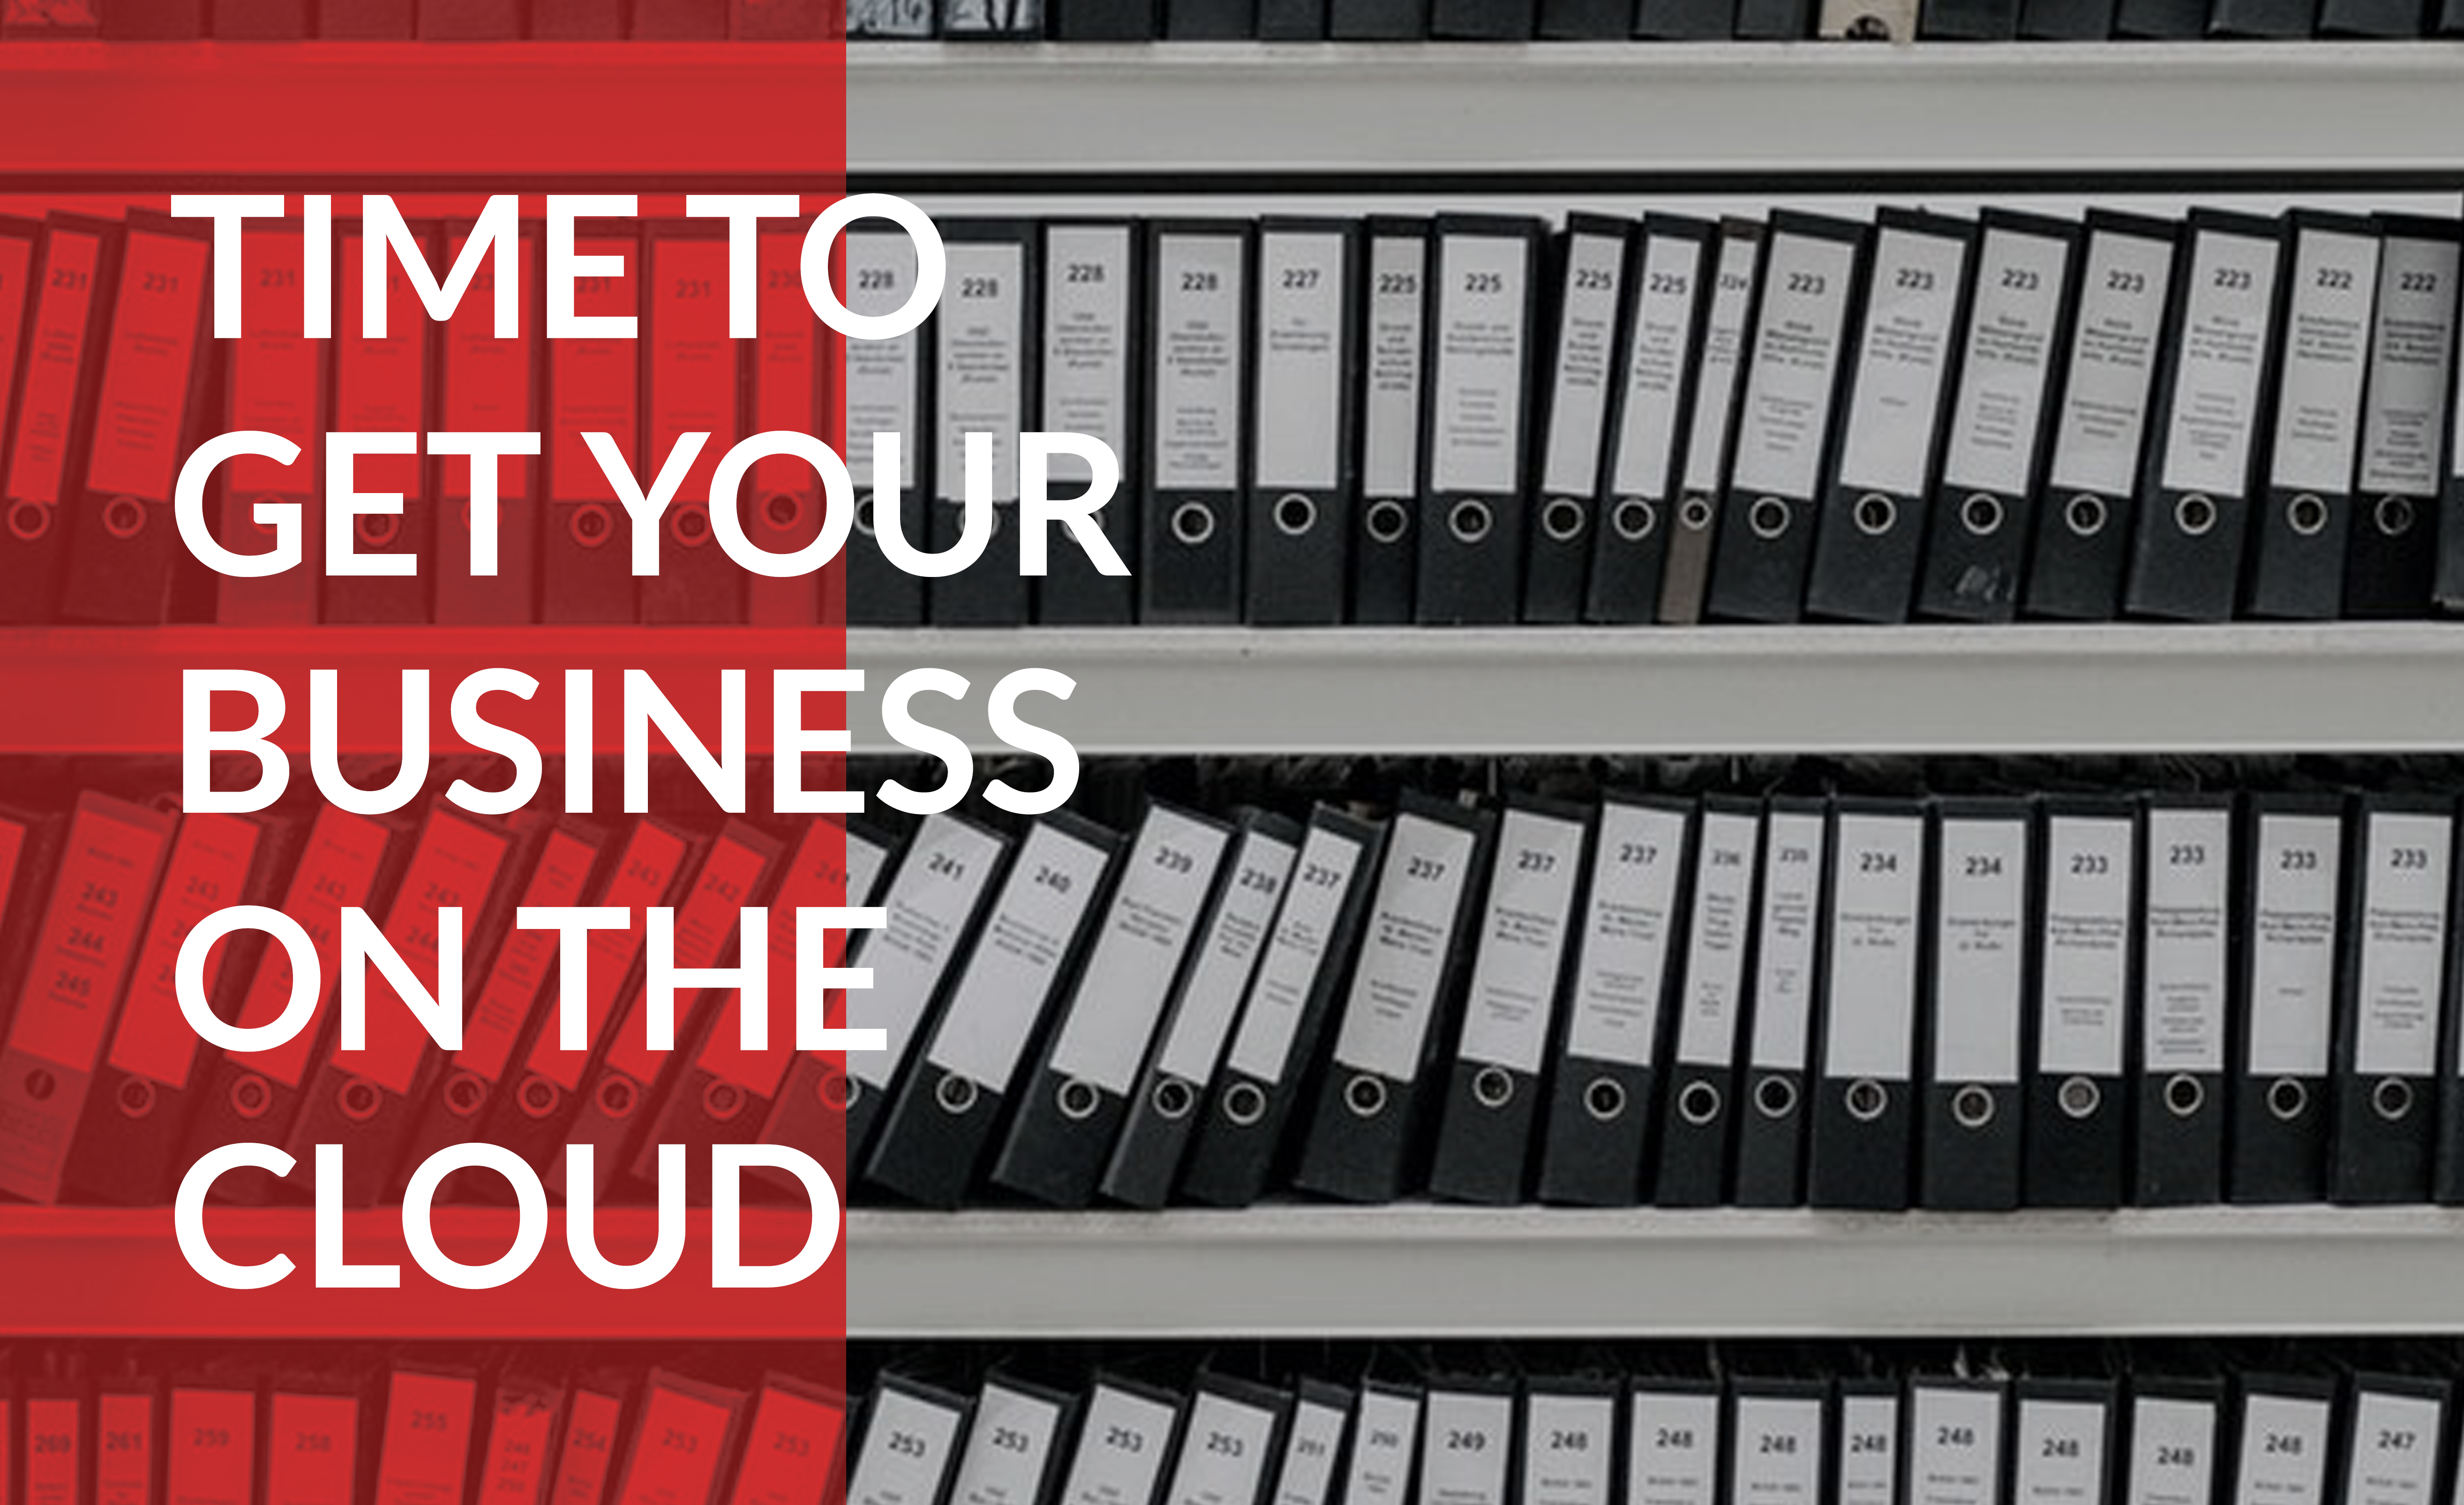 Bring your business up to date by moving your documents onto the cloud.